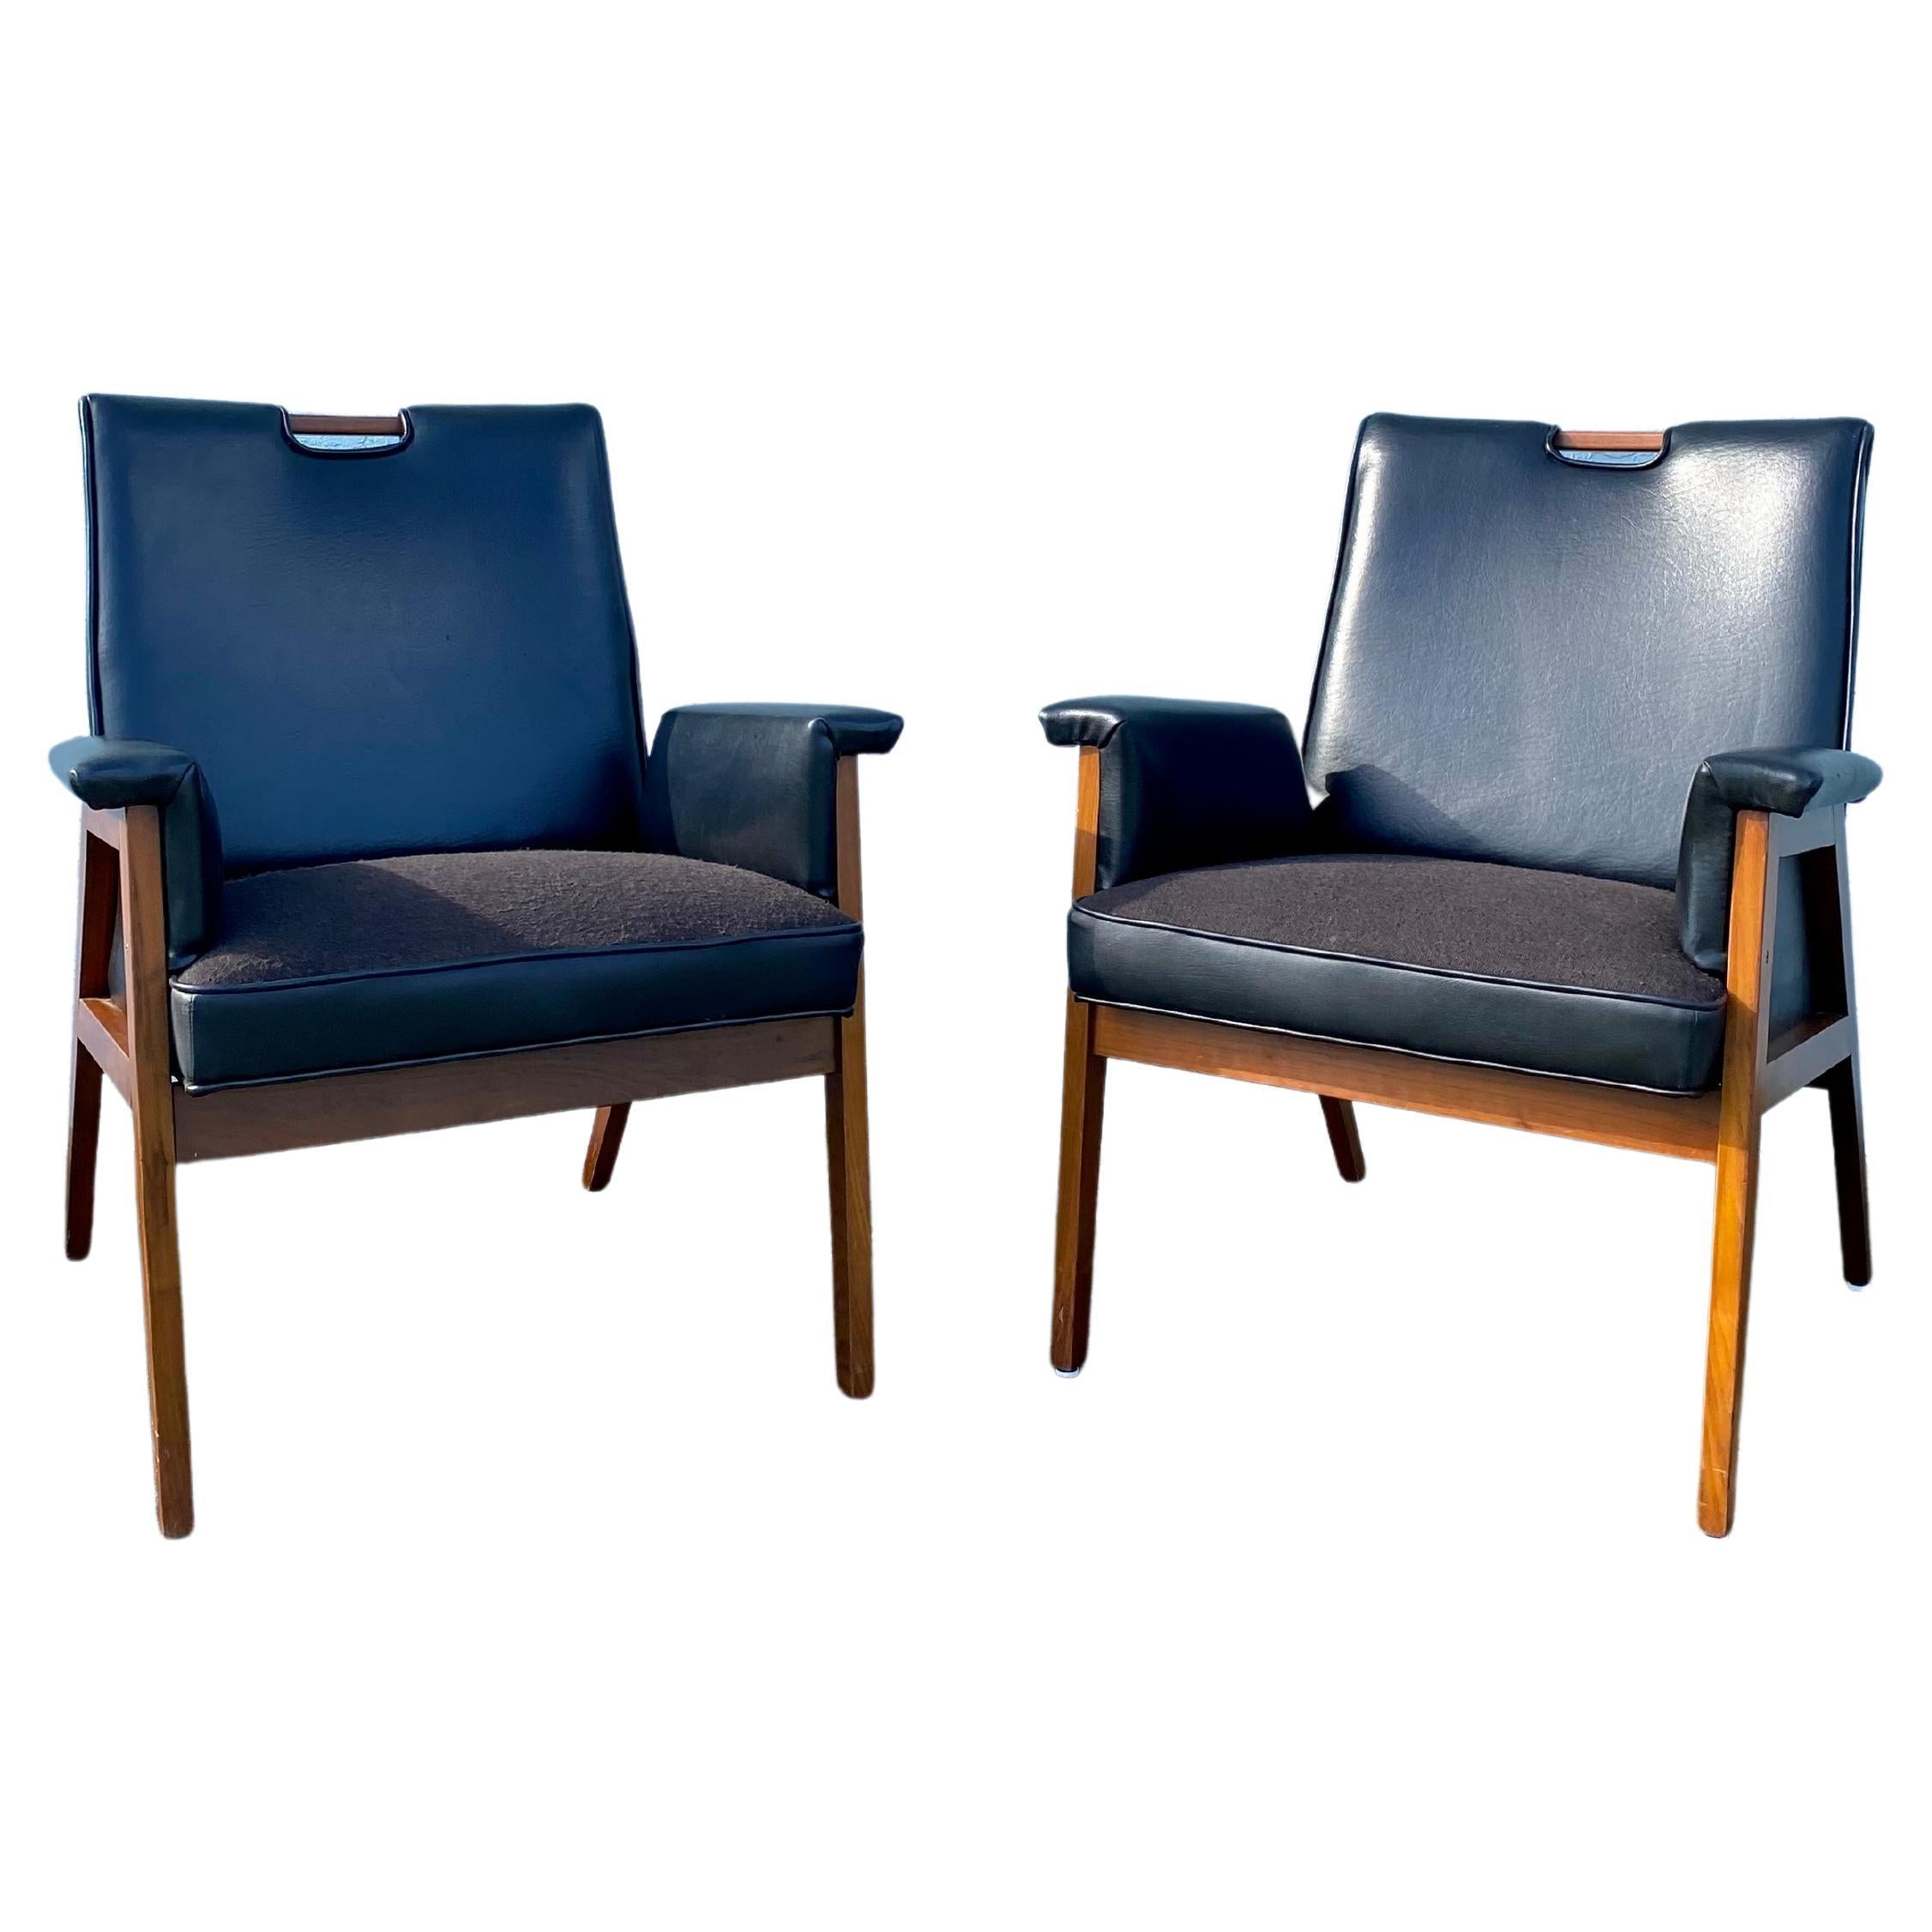 1960s Finn Julh Danish Walnut Leather Sculptural Chairs, Set of 2 For Sale